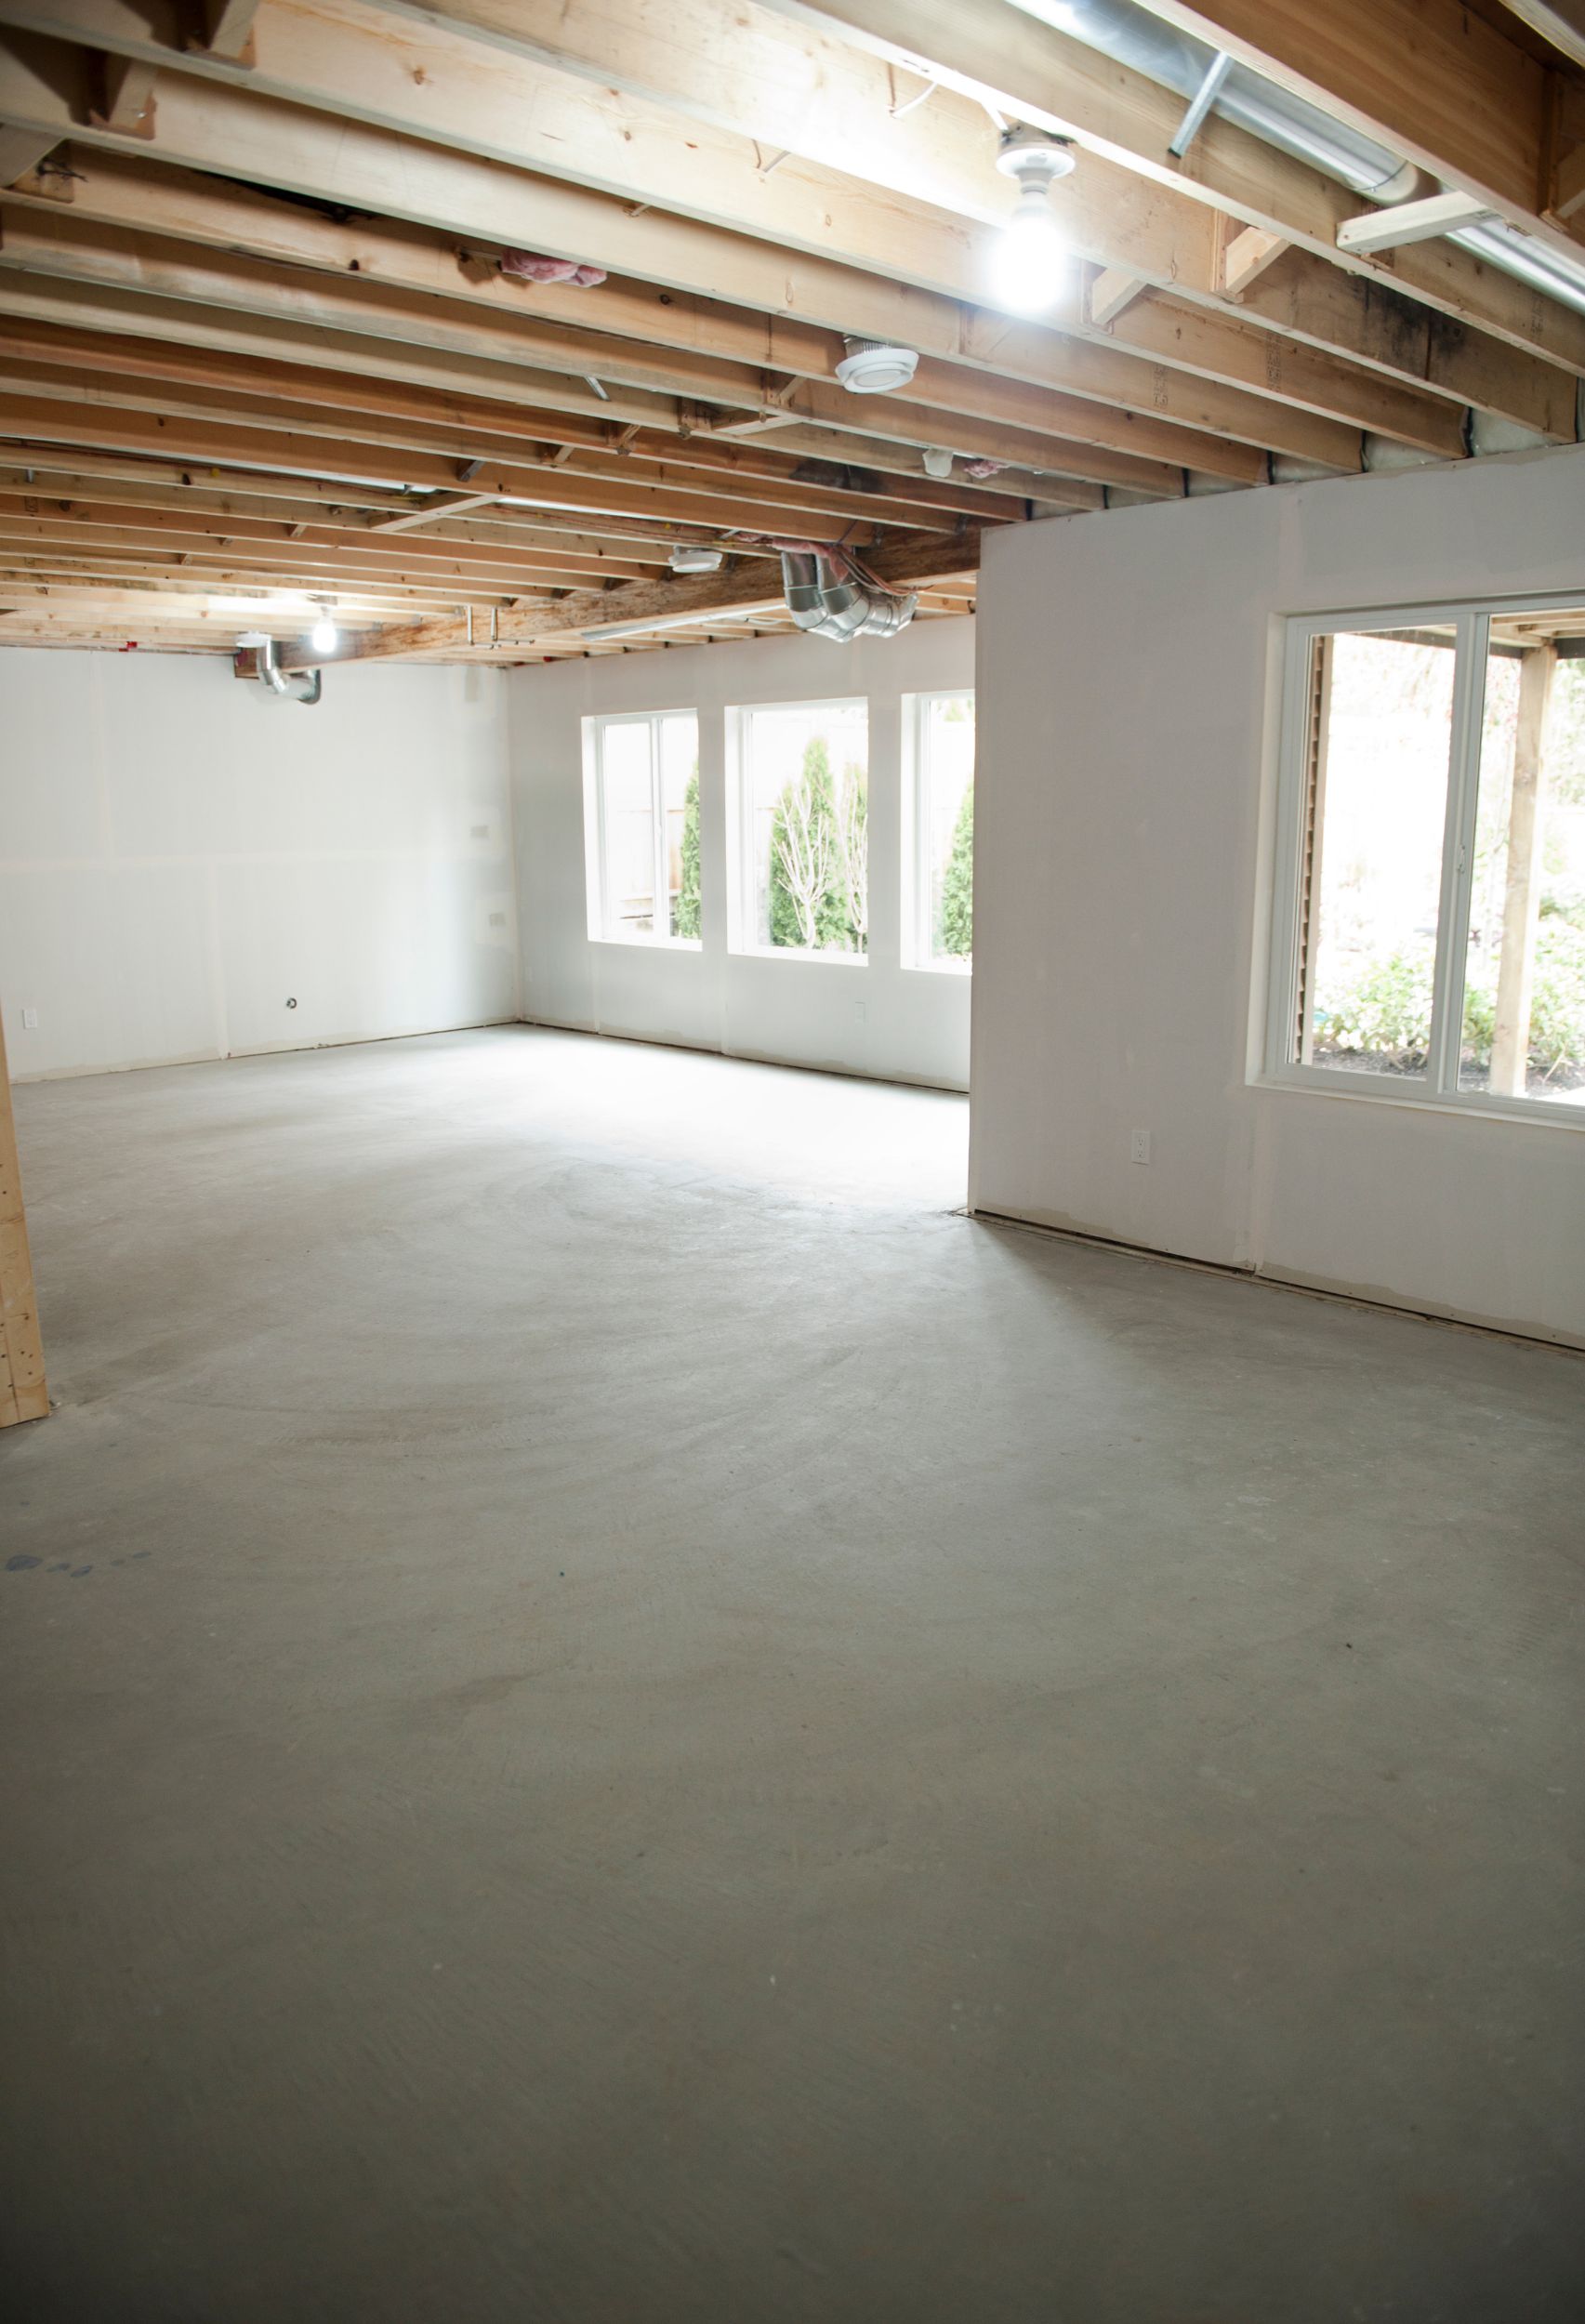 6 Things To Remember Before You Build Your Basement